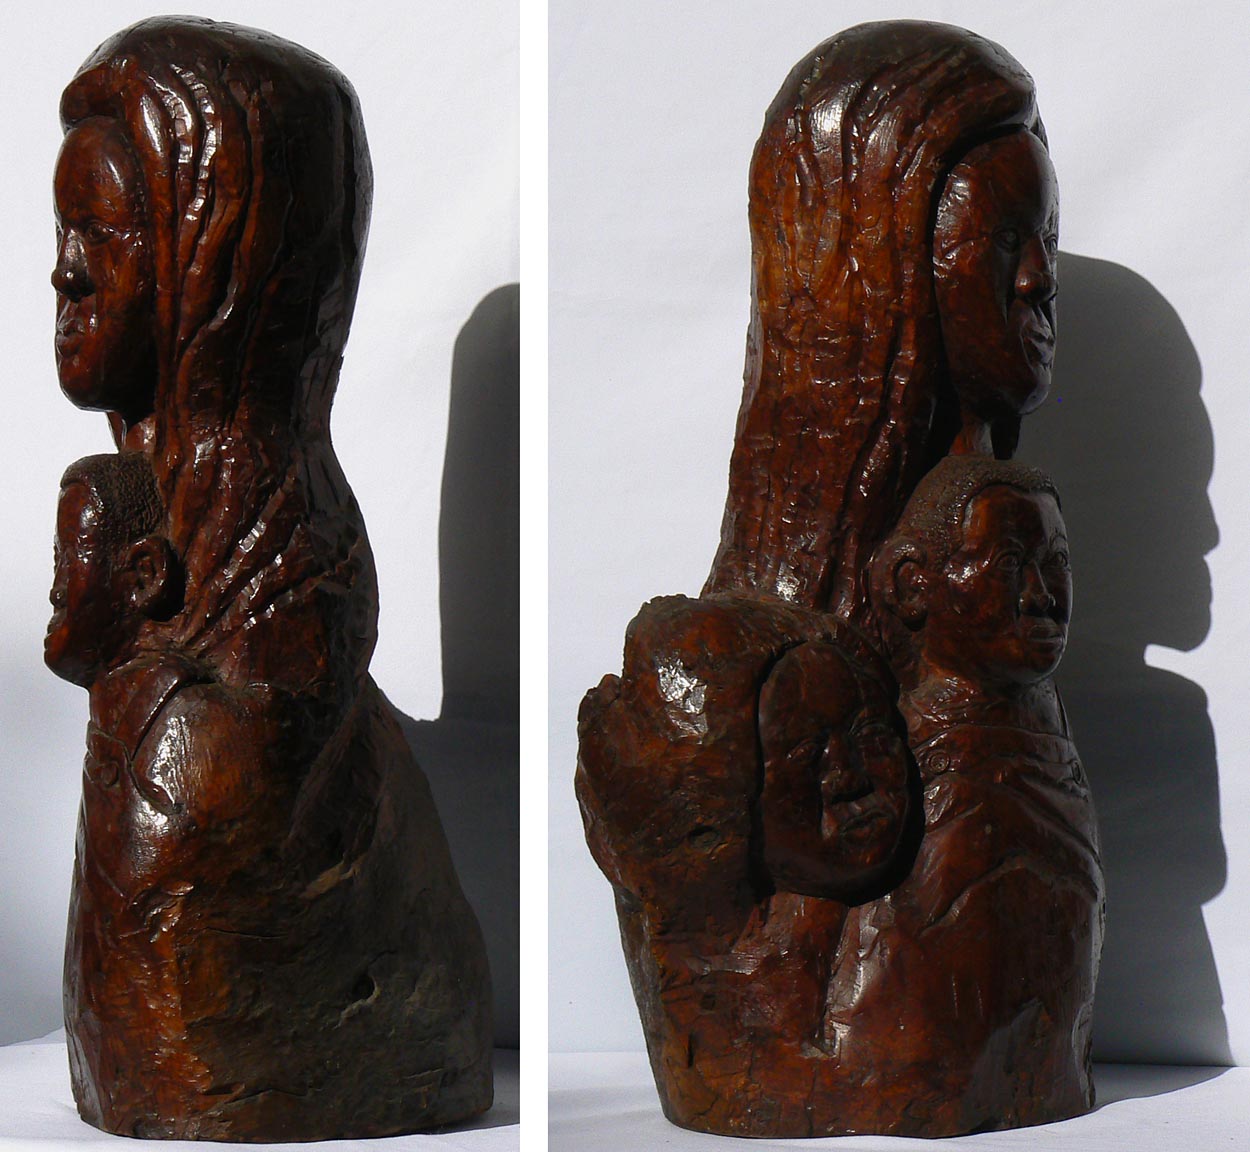 African-American carving of mother and children